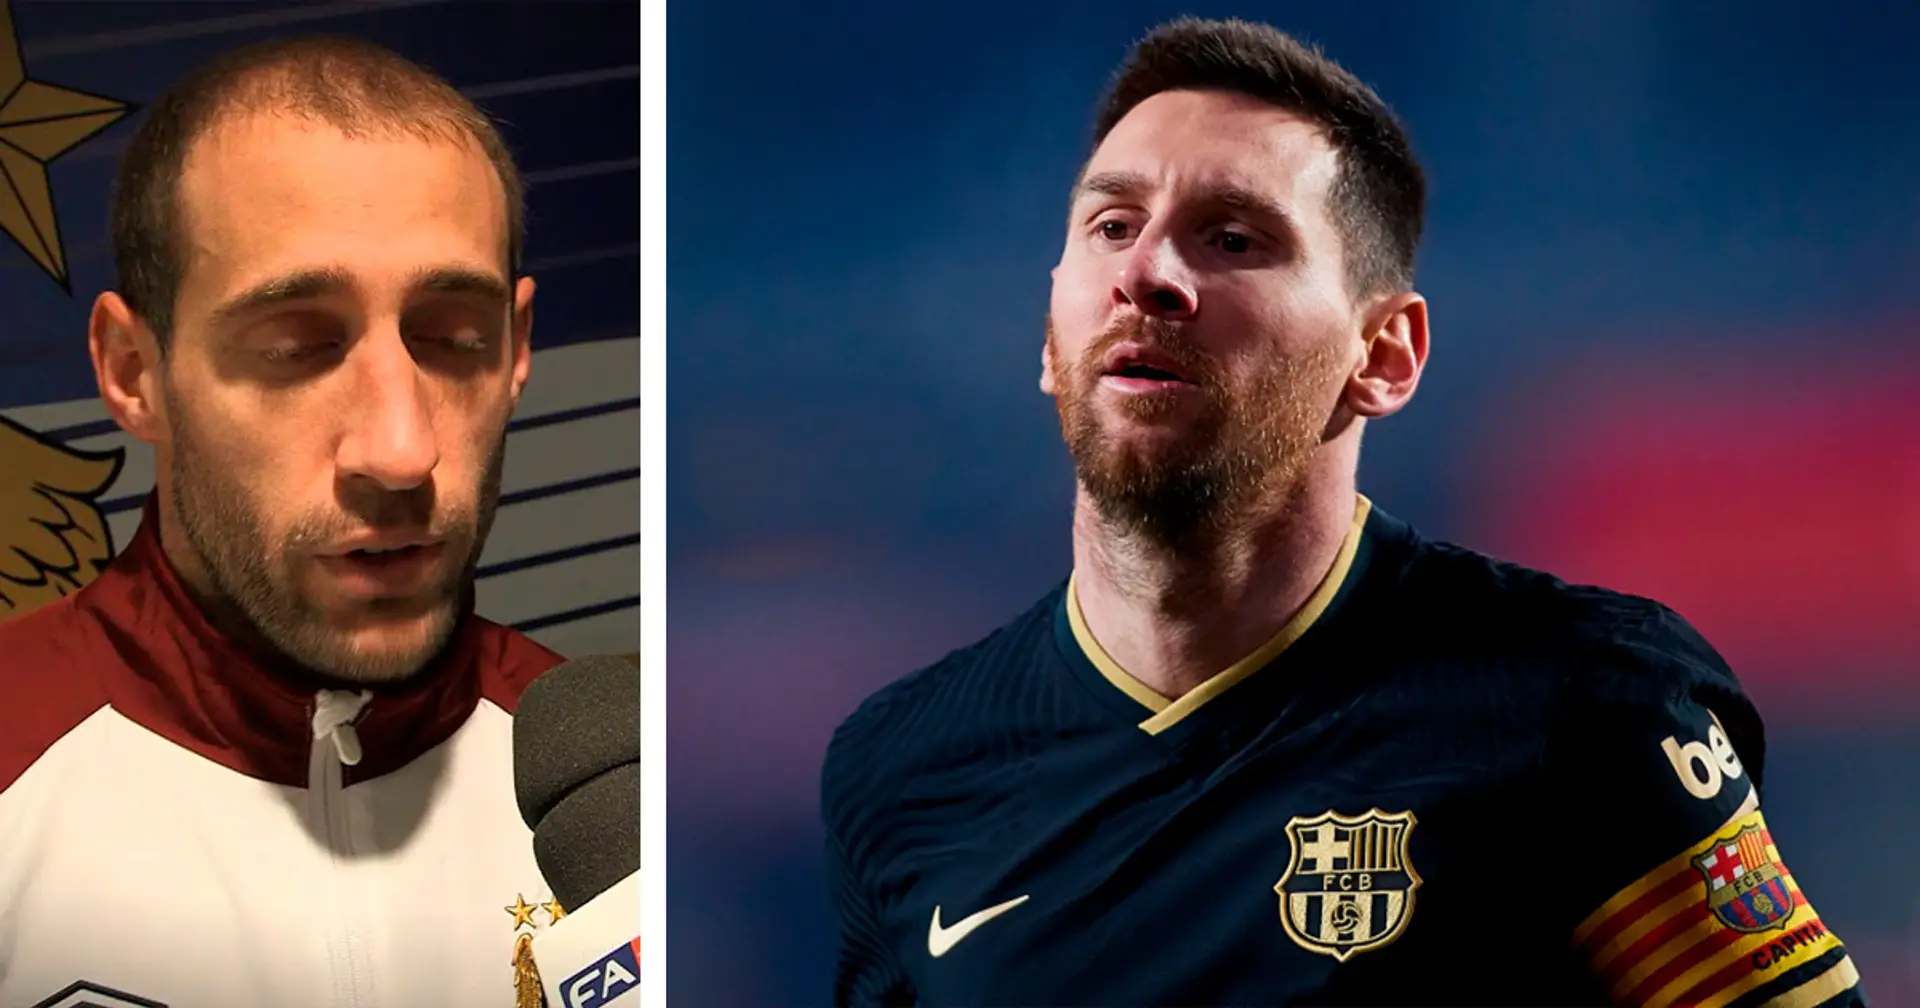 'They offer him the perfect conditions': Pablo Zabaleta explains why Man City move would be 'huge attraction' for Messi